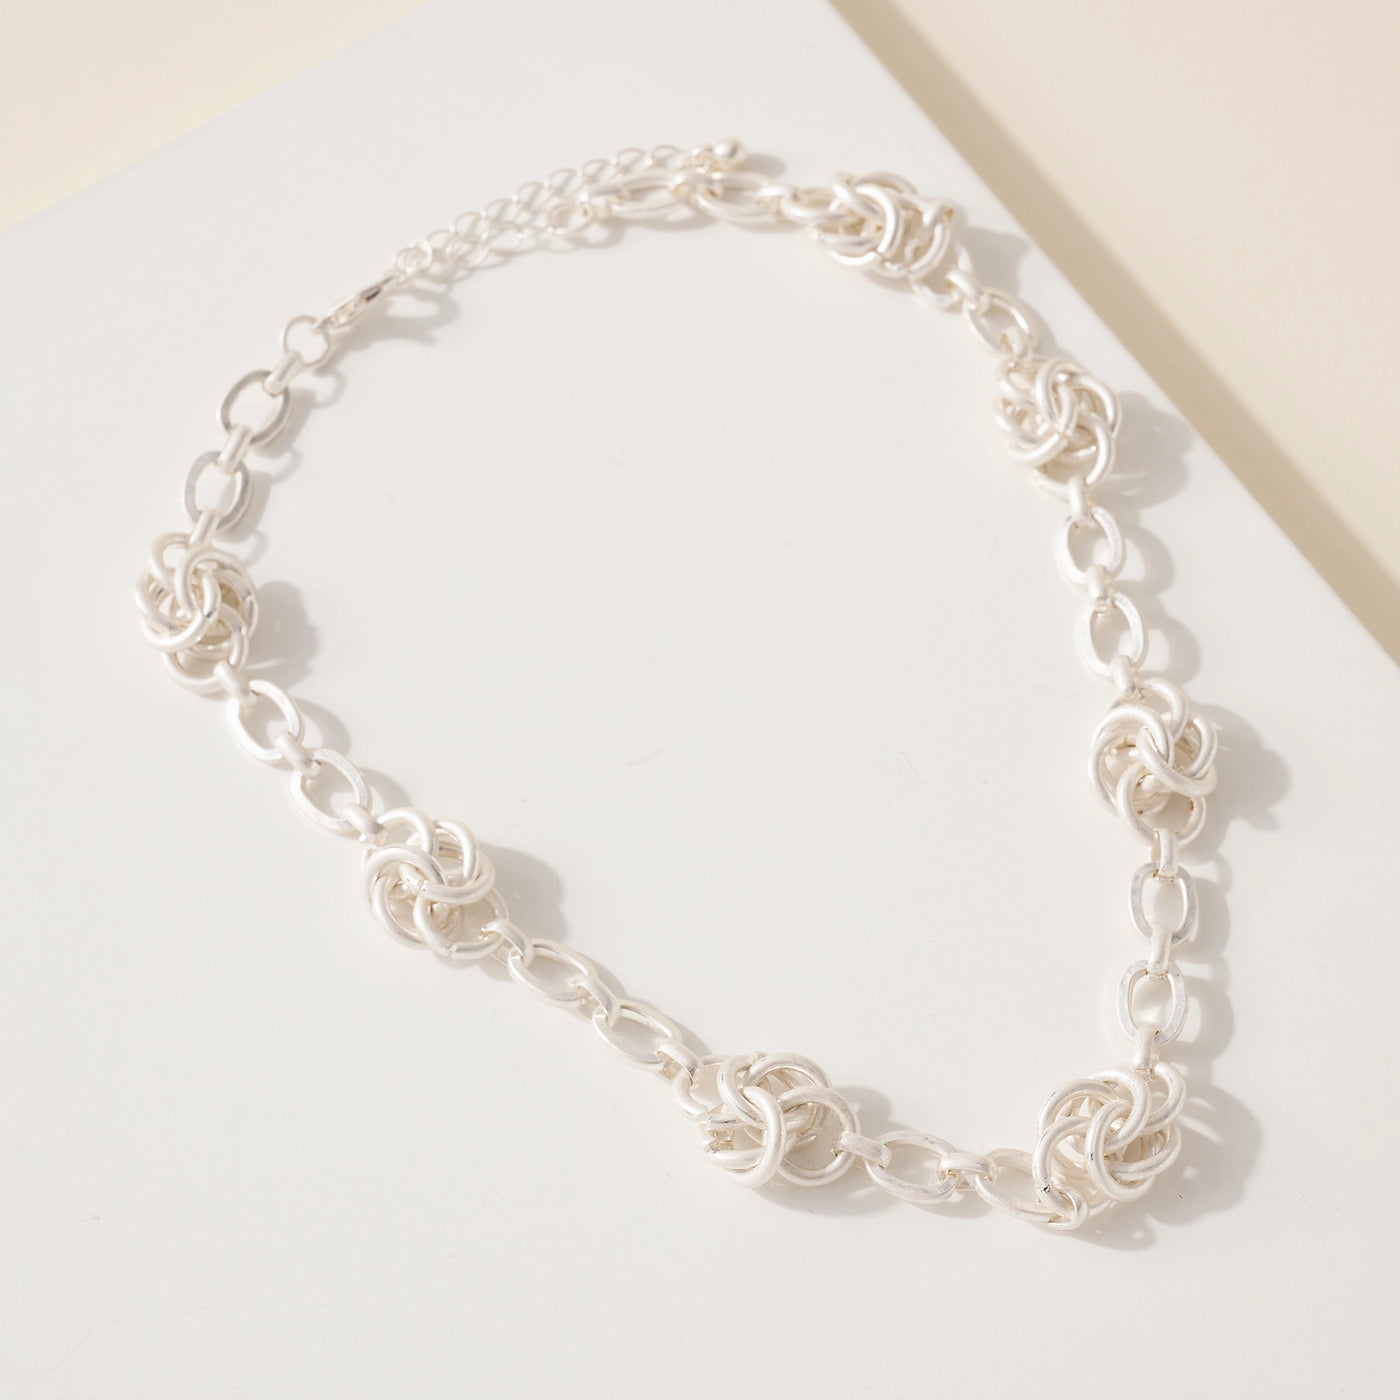 Metal Knot Chain Necklace// 2 COLORS